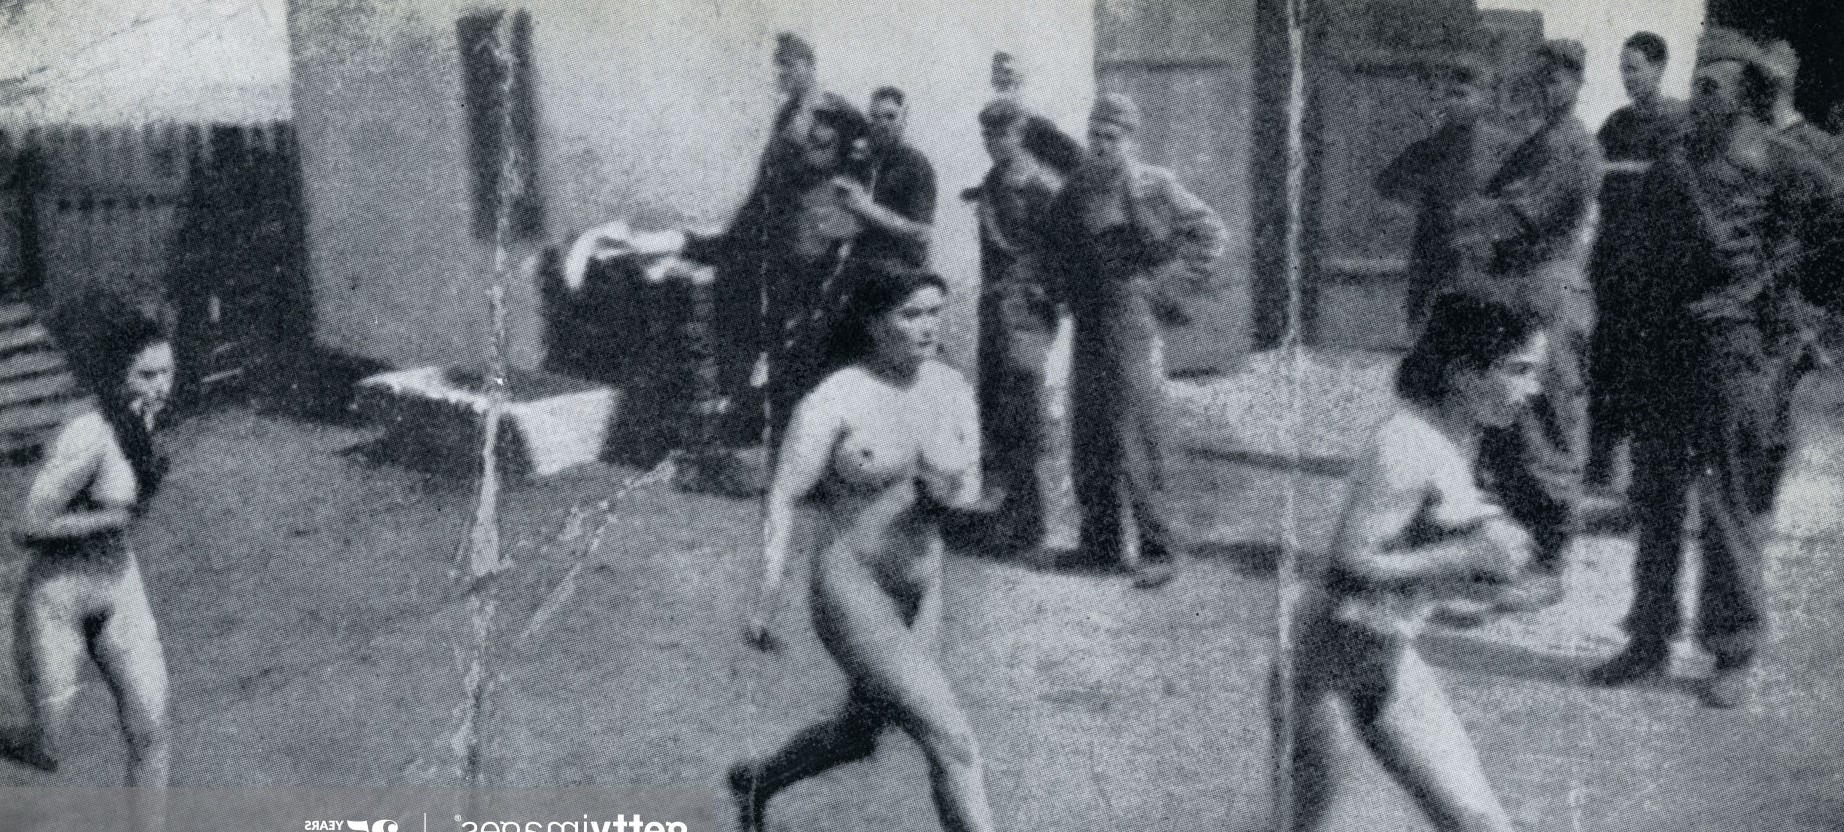 Naked women humiliated